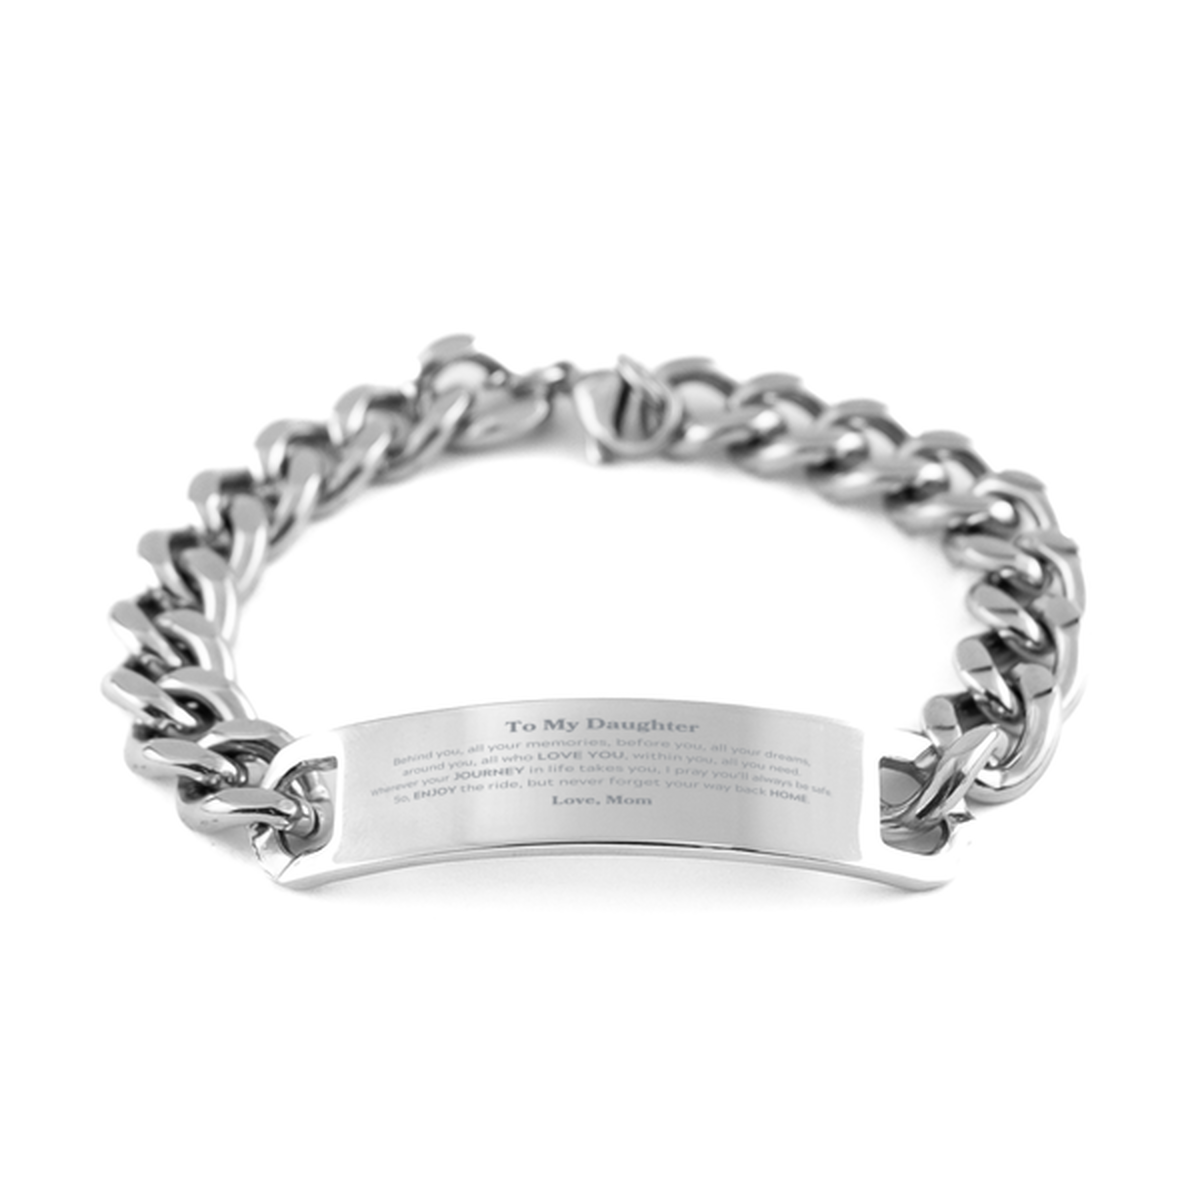 To My Daughter Graduation Gifts from Mom, Daughter Cuban Chain Stainless Steel Bracelet Christmas Birthday Gifts for Daughter Behind you, all your memories, before you, all your dreams. Love, Mom